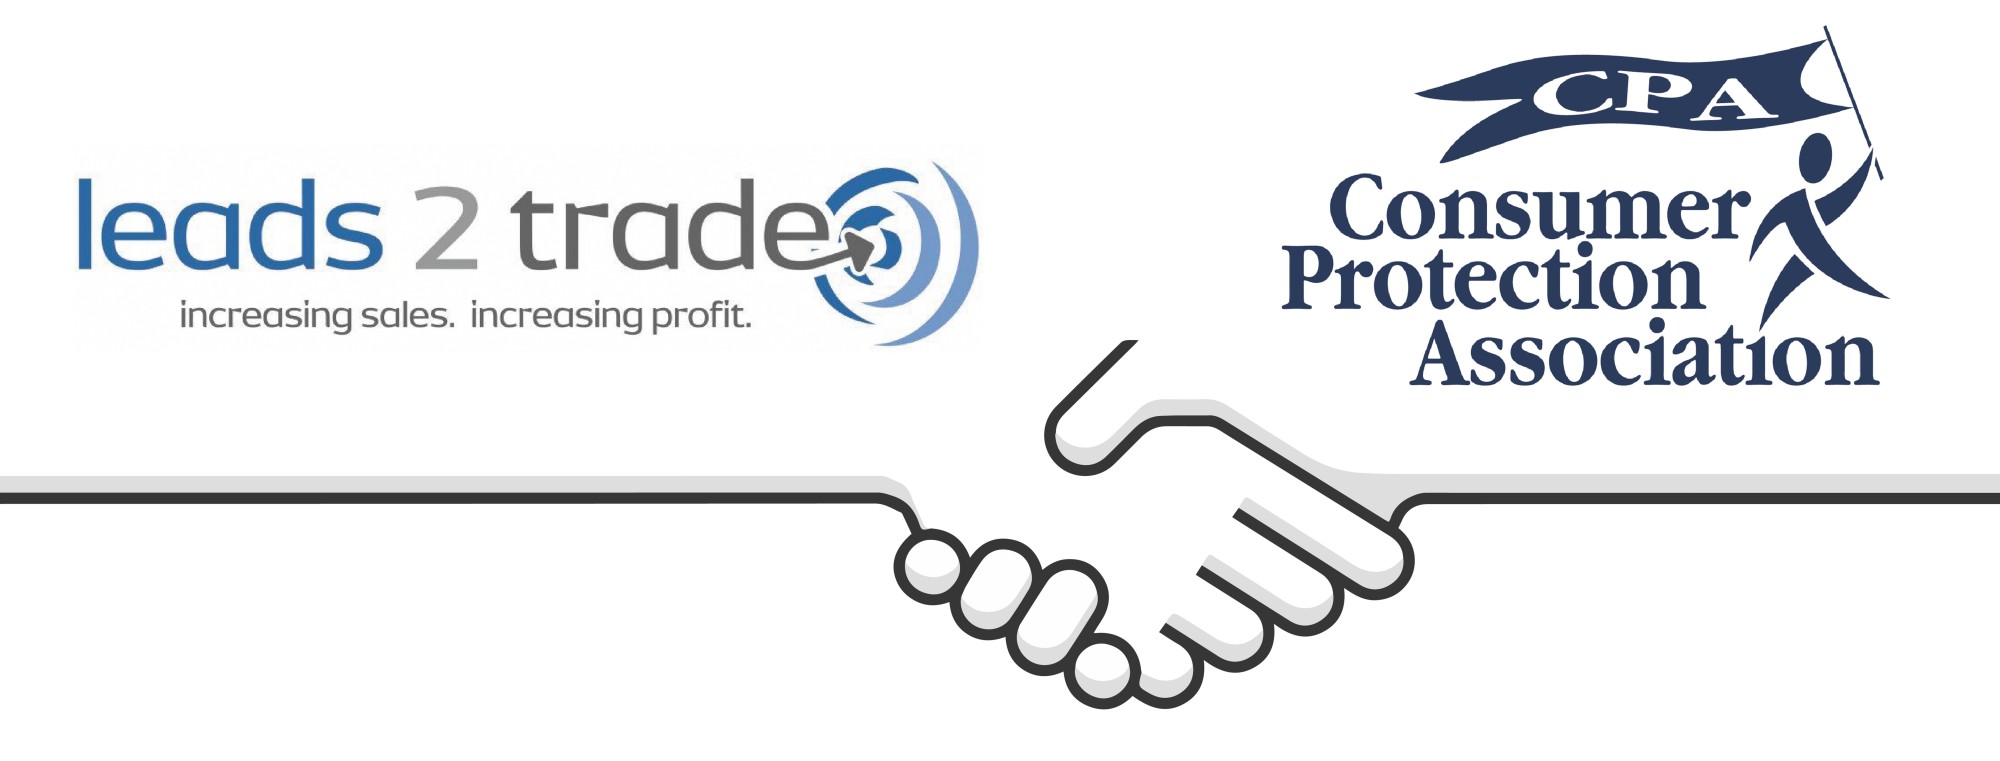 Leads 2 Trade and CPA Logos